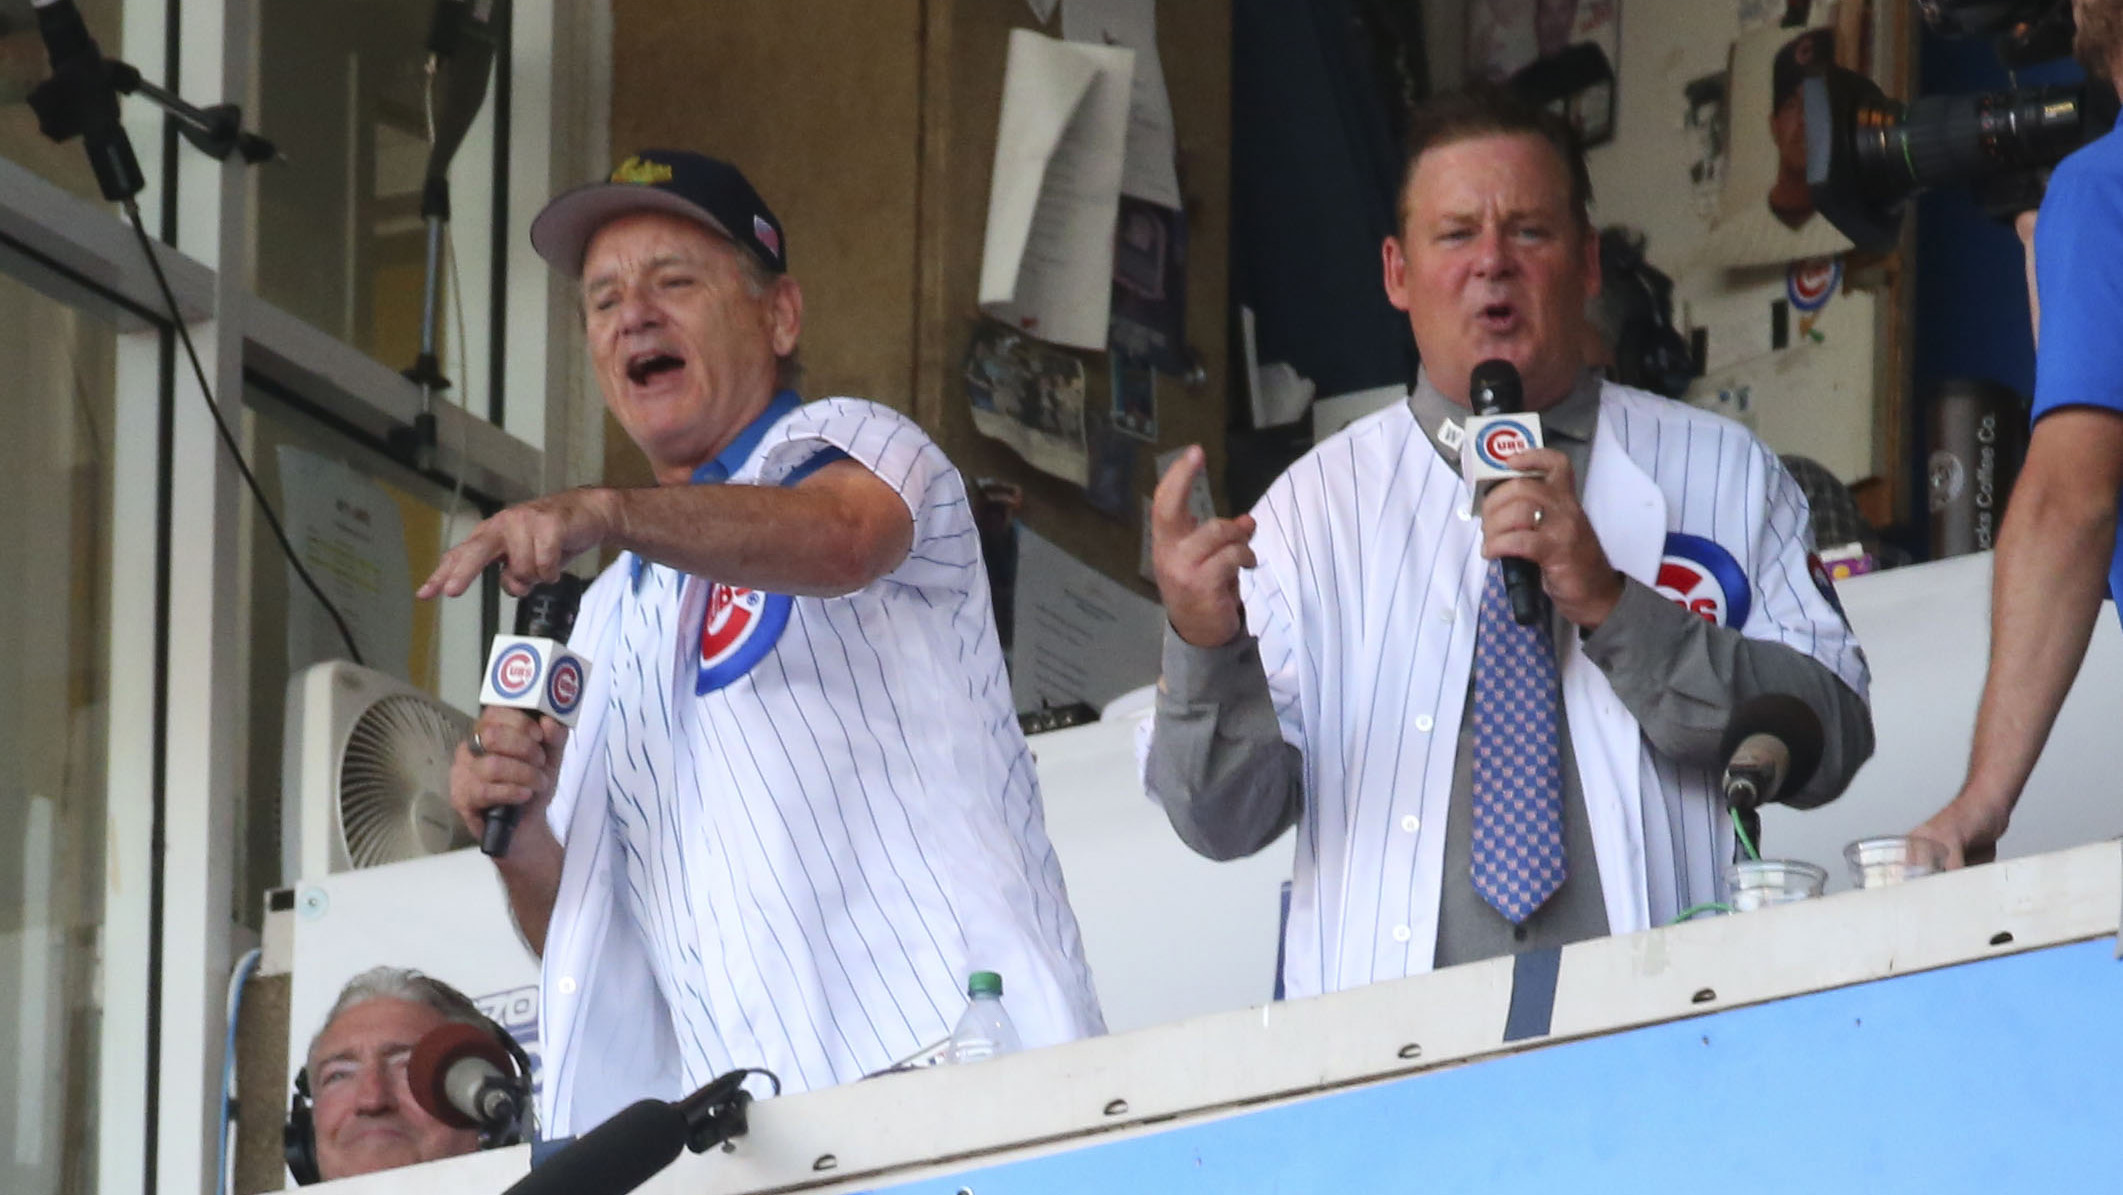 Celebrities among those long-suffering Chicago Cubs fans